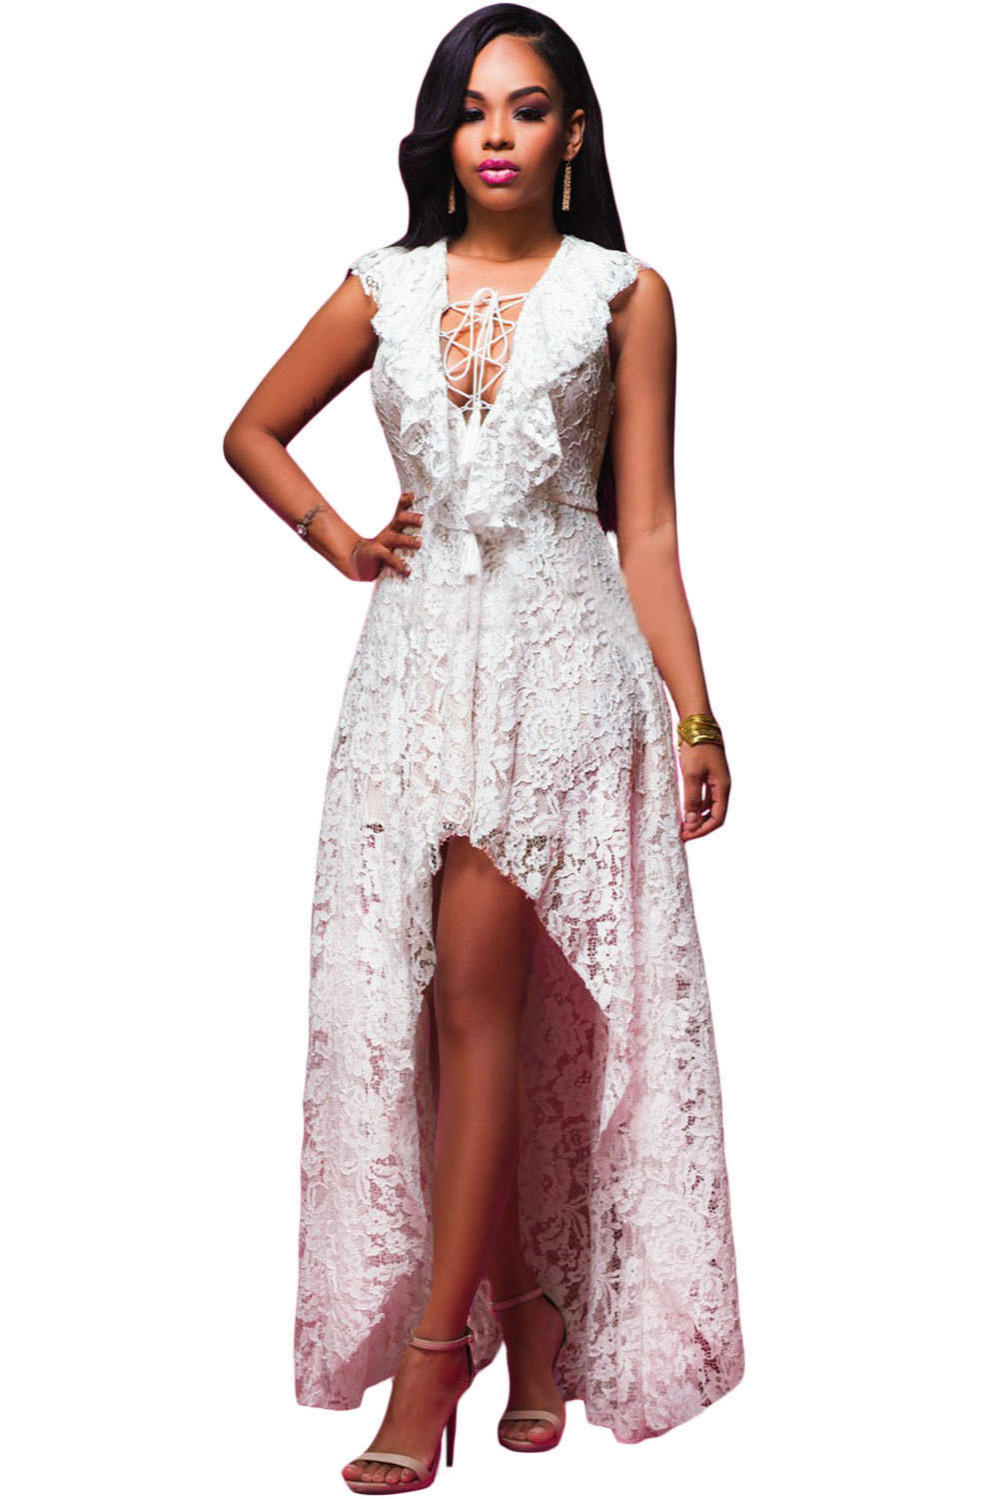 White-Lace-Ruffles-Neck-Sleeveless-High-Low-Party-Dress-LC61127-32678959268